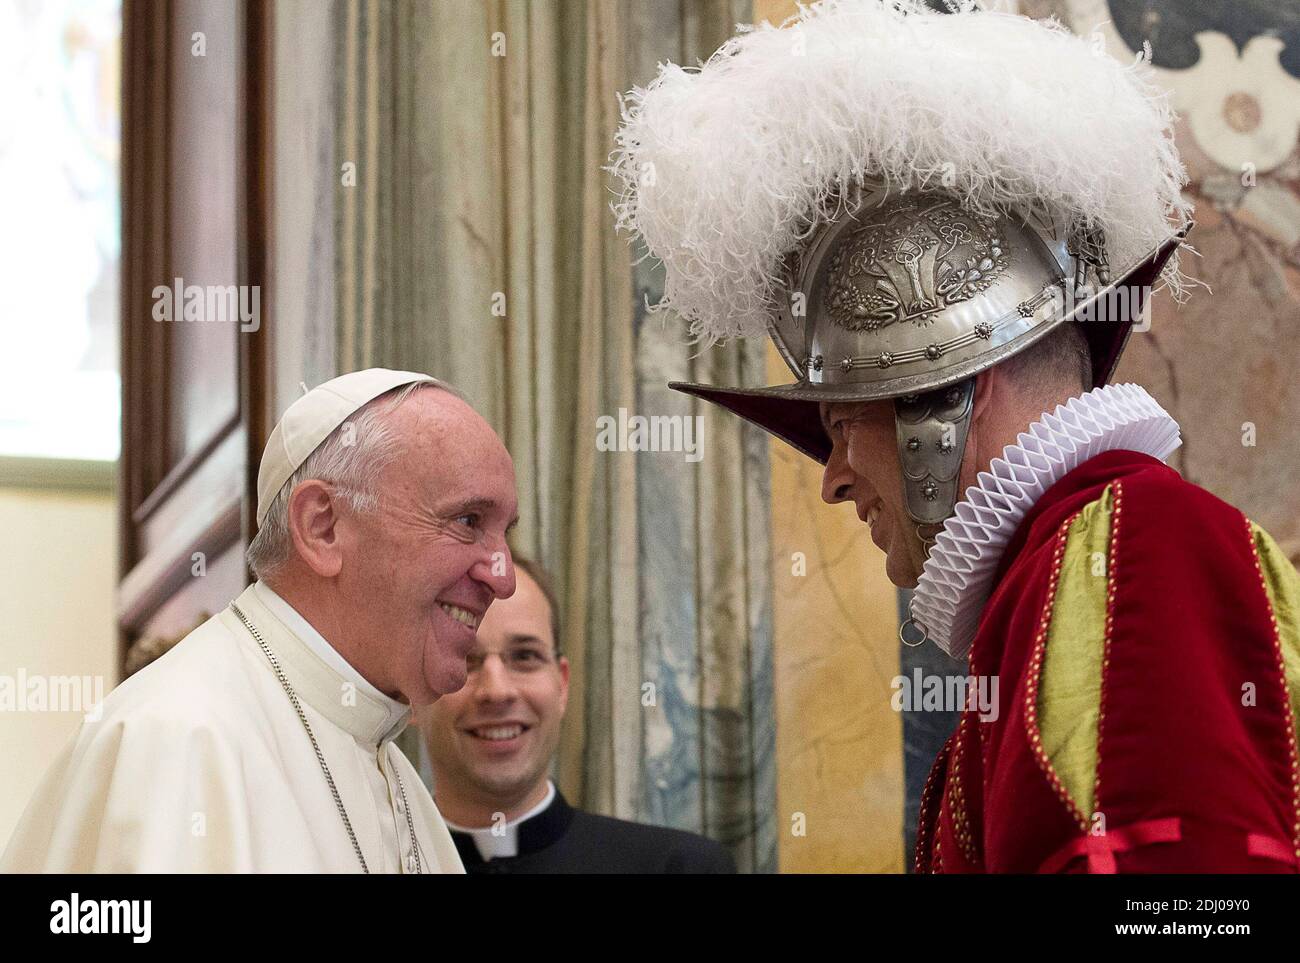 Pope Francis greets Swiss Guard commander Lt. Col. Christoph Graf on May 7, 2016 in the Clementine hall at the Vatican, one day after new members of the corps took their oath of allegiance and were sworn into active service. Pope Francis recalled the spirit of faithful service that animates the great legacy of sacrifice and heroism in his remarks to new recruits and their families. The Swiss Guards hold their swearing-in ceremony each year on May 6th, to mark the day in 1527 when 147 members of their corps gave their lives in a desperate rear-guard action that allowed Pope Clement VII to reach Stock Photo